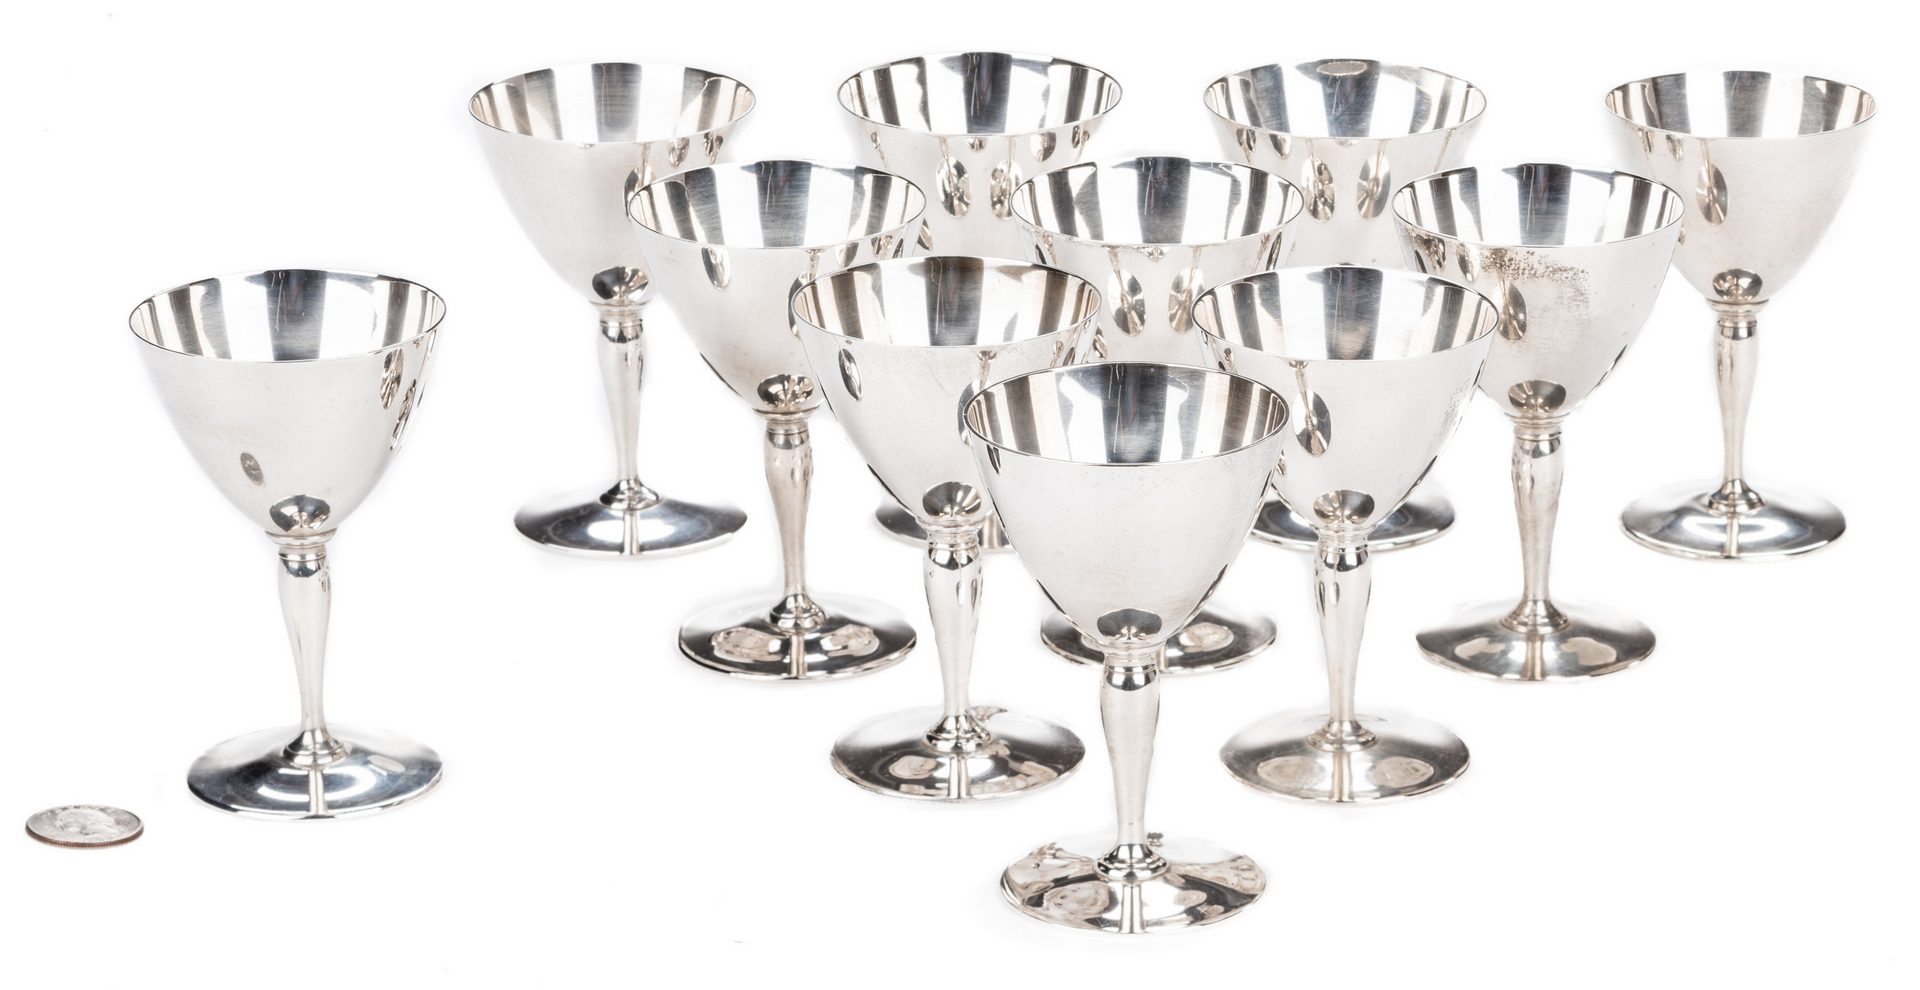 Lot 61: Set of 11 Tiffany & Co Sterling Silver Goblets